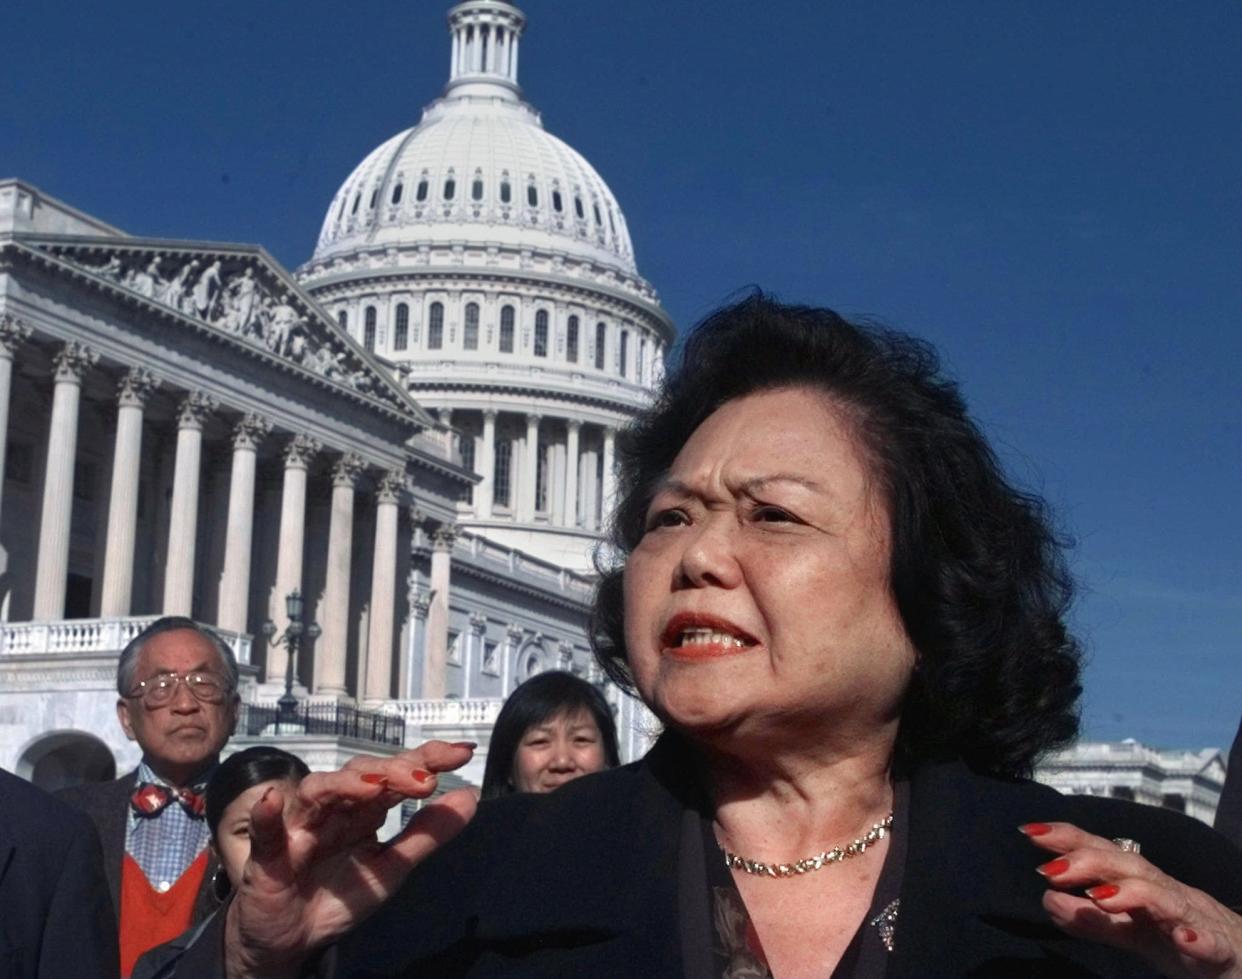 ** RETRANSMISSION TO ADD DATELINE ** FILE ** Rep. Patsy Mink, D-Hawaii, meets reporters on Capitol Hill in this  Nov. 5, 1997 file photo.  Mink, who had been hospitalized for nearly a month with viral pneumonia, died Saturday, Sept. 28, 2002, at Straub Clinic and Hospital, in Honolulu, Hawaii her office said. She was 74.  (AP Photo/Joe Marquette, File) ORG XMIT: NY129